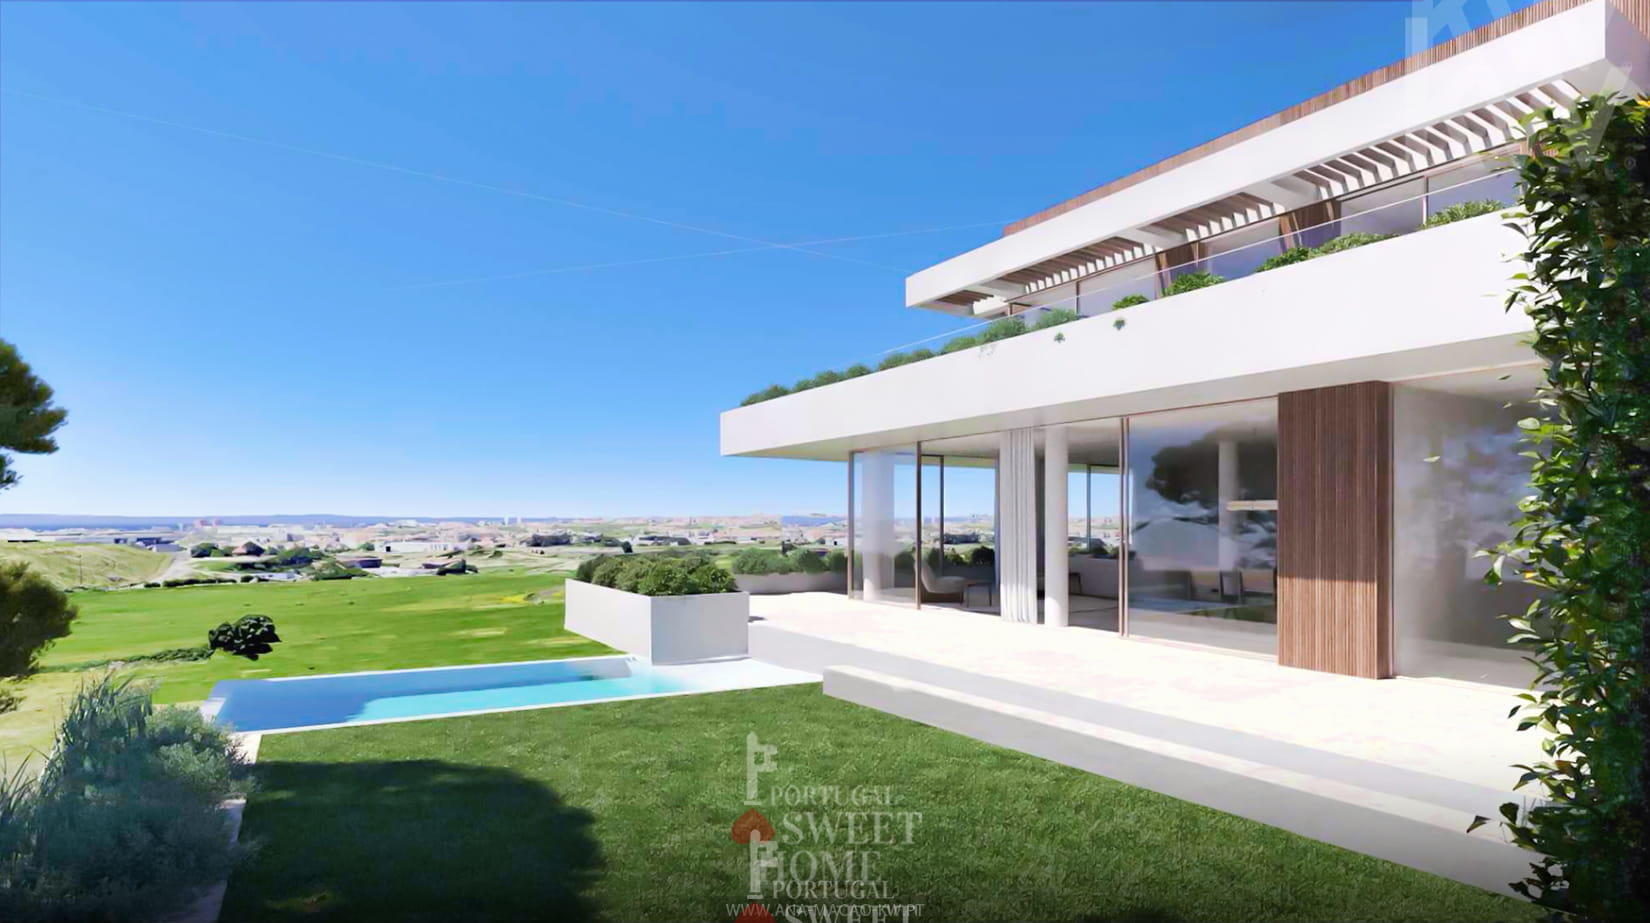 Oeiras, Leceia - Land for 5 bedroom villa with pool, garage and sea view